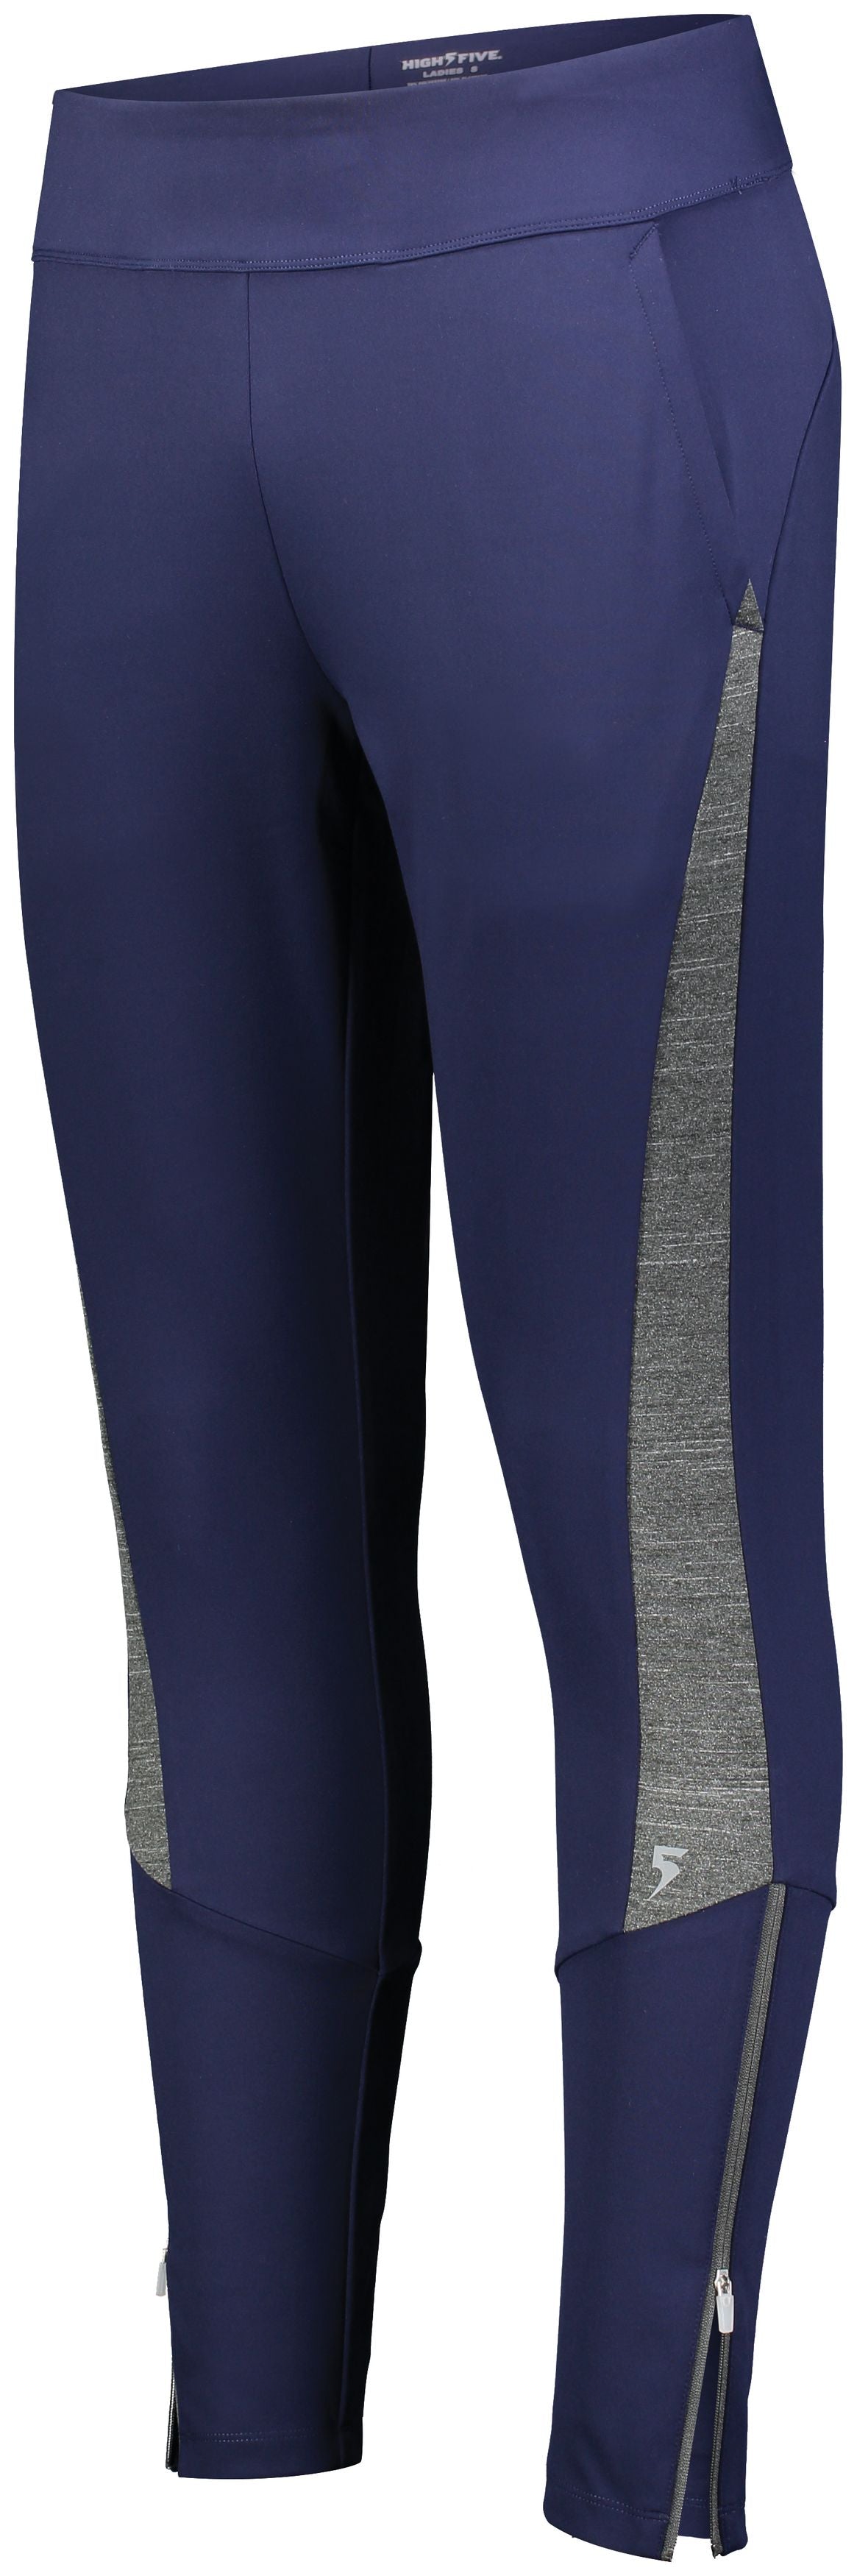 High 5 Ladies Free Form Pant in Navy/Carbon Heather  -Part of the Ladies, Ladies-Pants, Pants, High5-Products product lines at KanaleyCreations.com